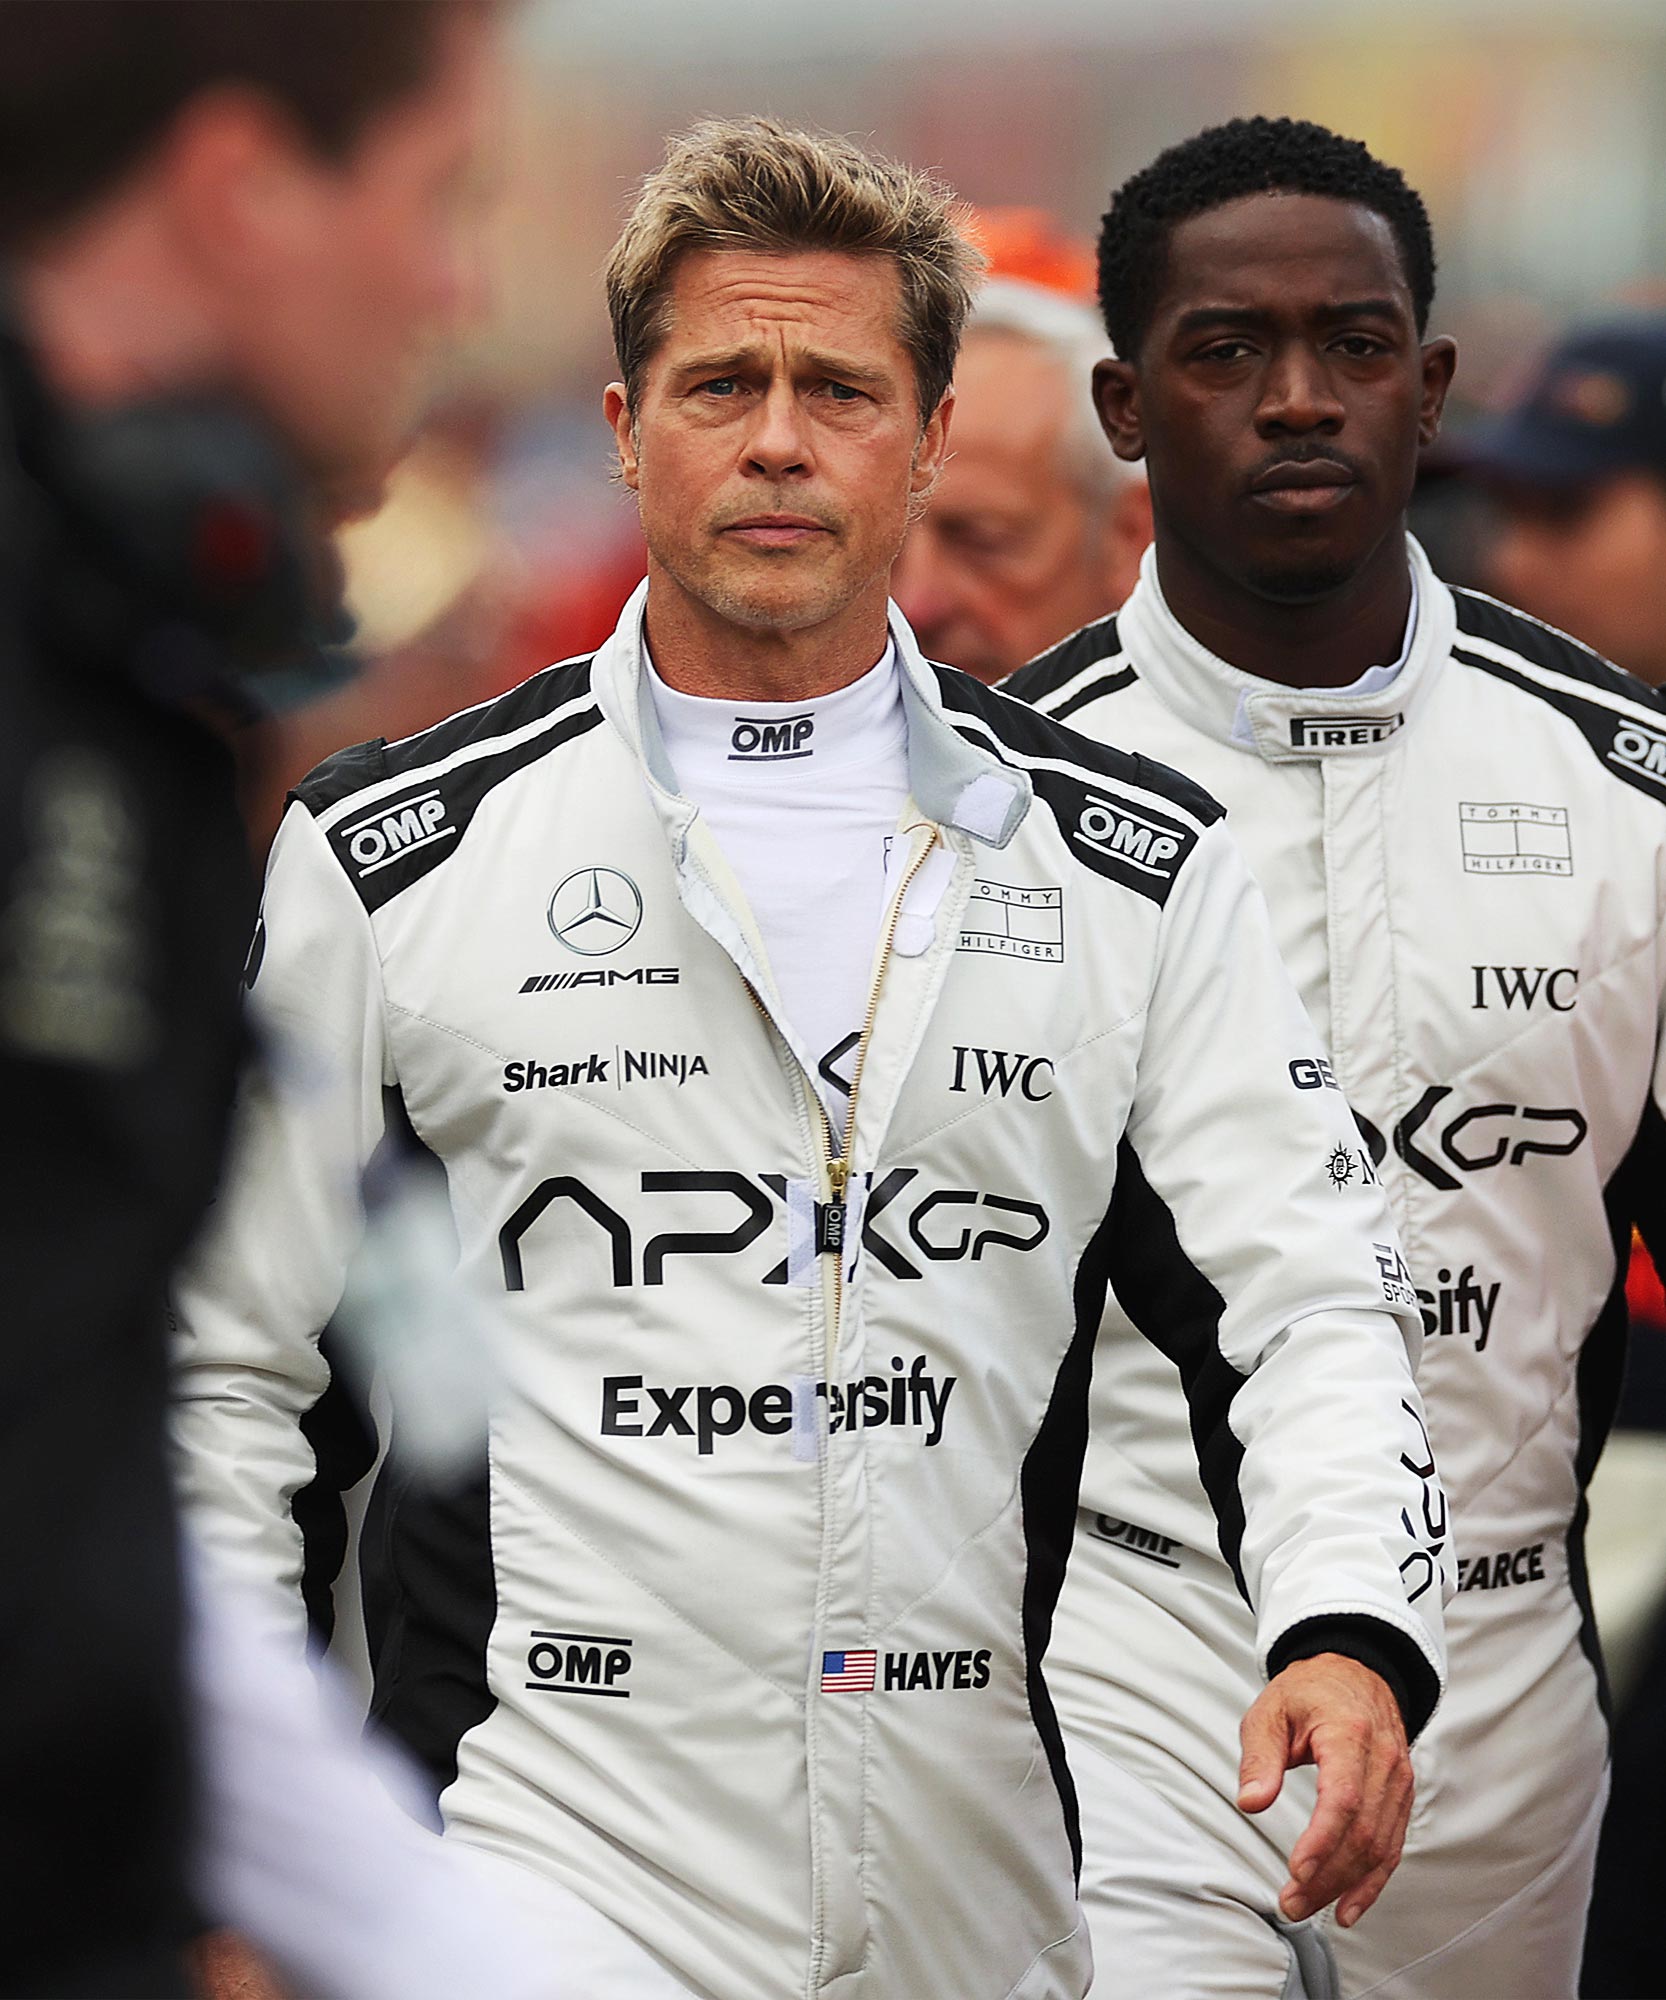 Brad Pitt Amazed Real Formula 1 Racers With His Stunt Driving for New Biopic Producer Says 358